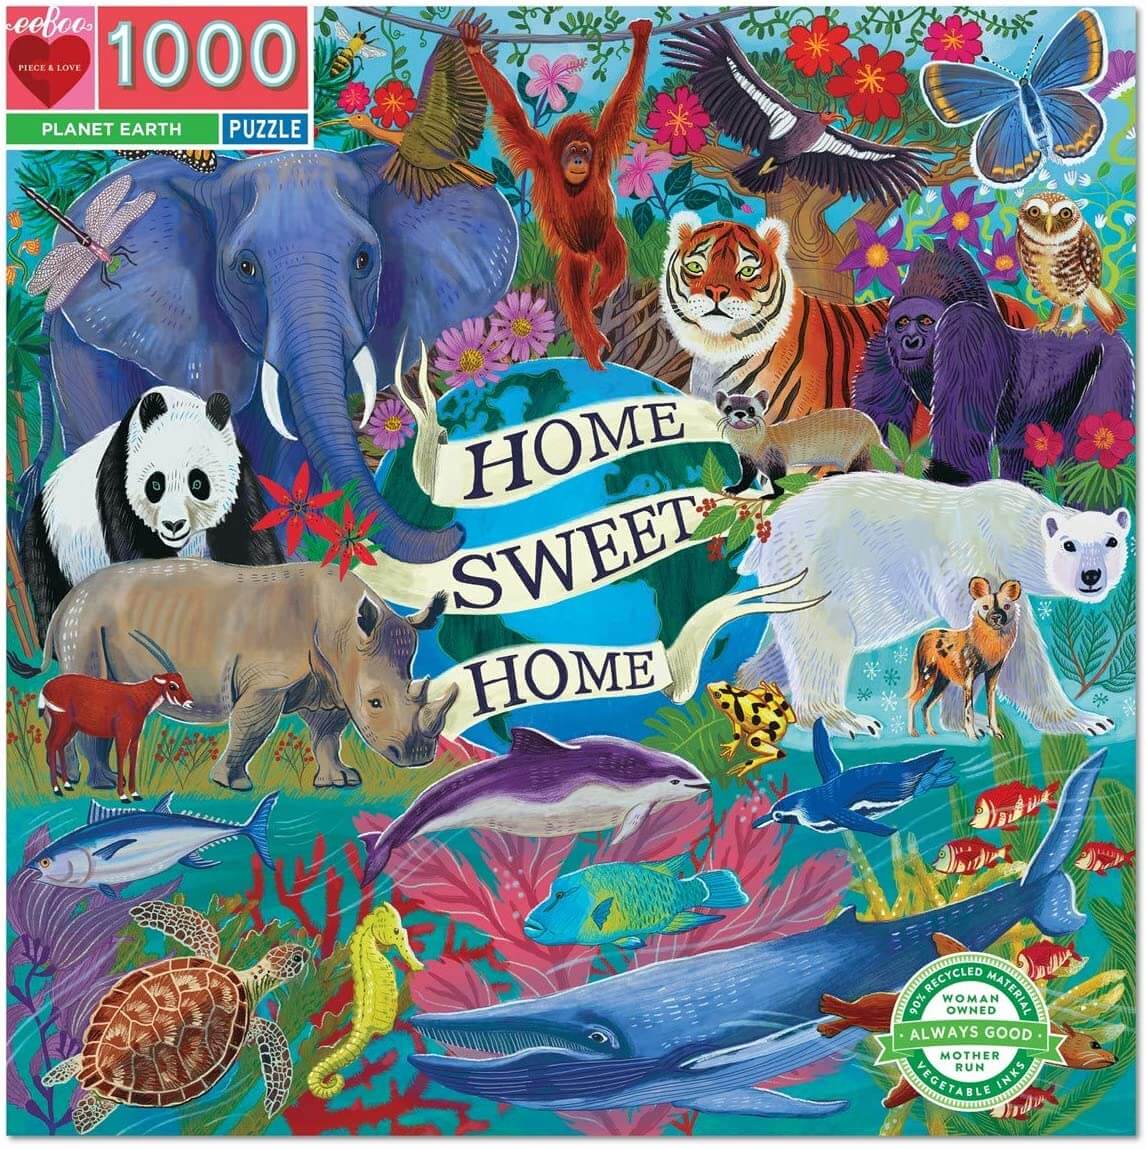 eeBoo - Piece and Love Planet Earth 1000 Piece Square Adult Jigsaw Puzzle